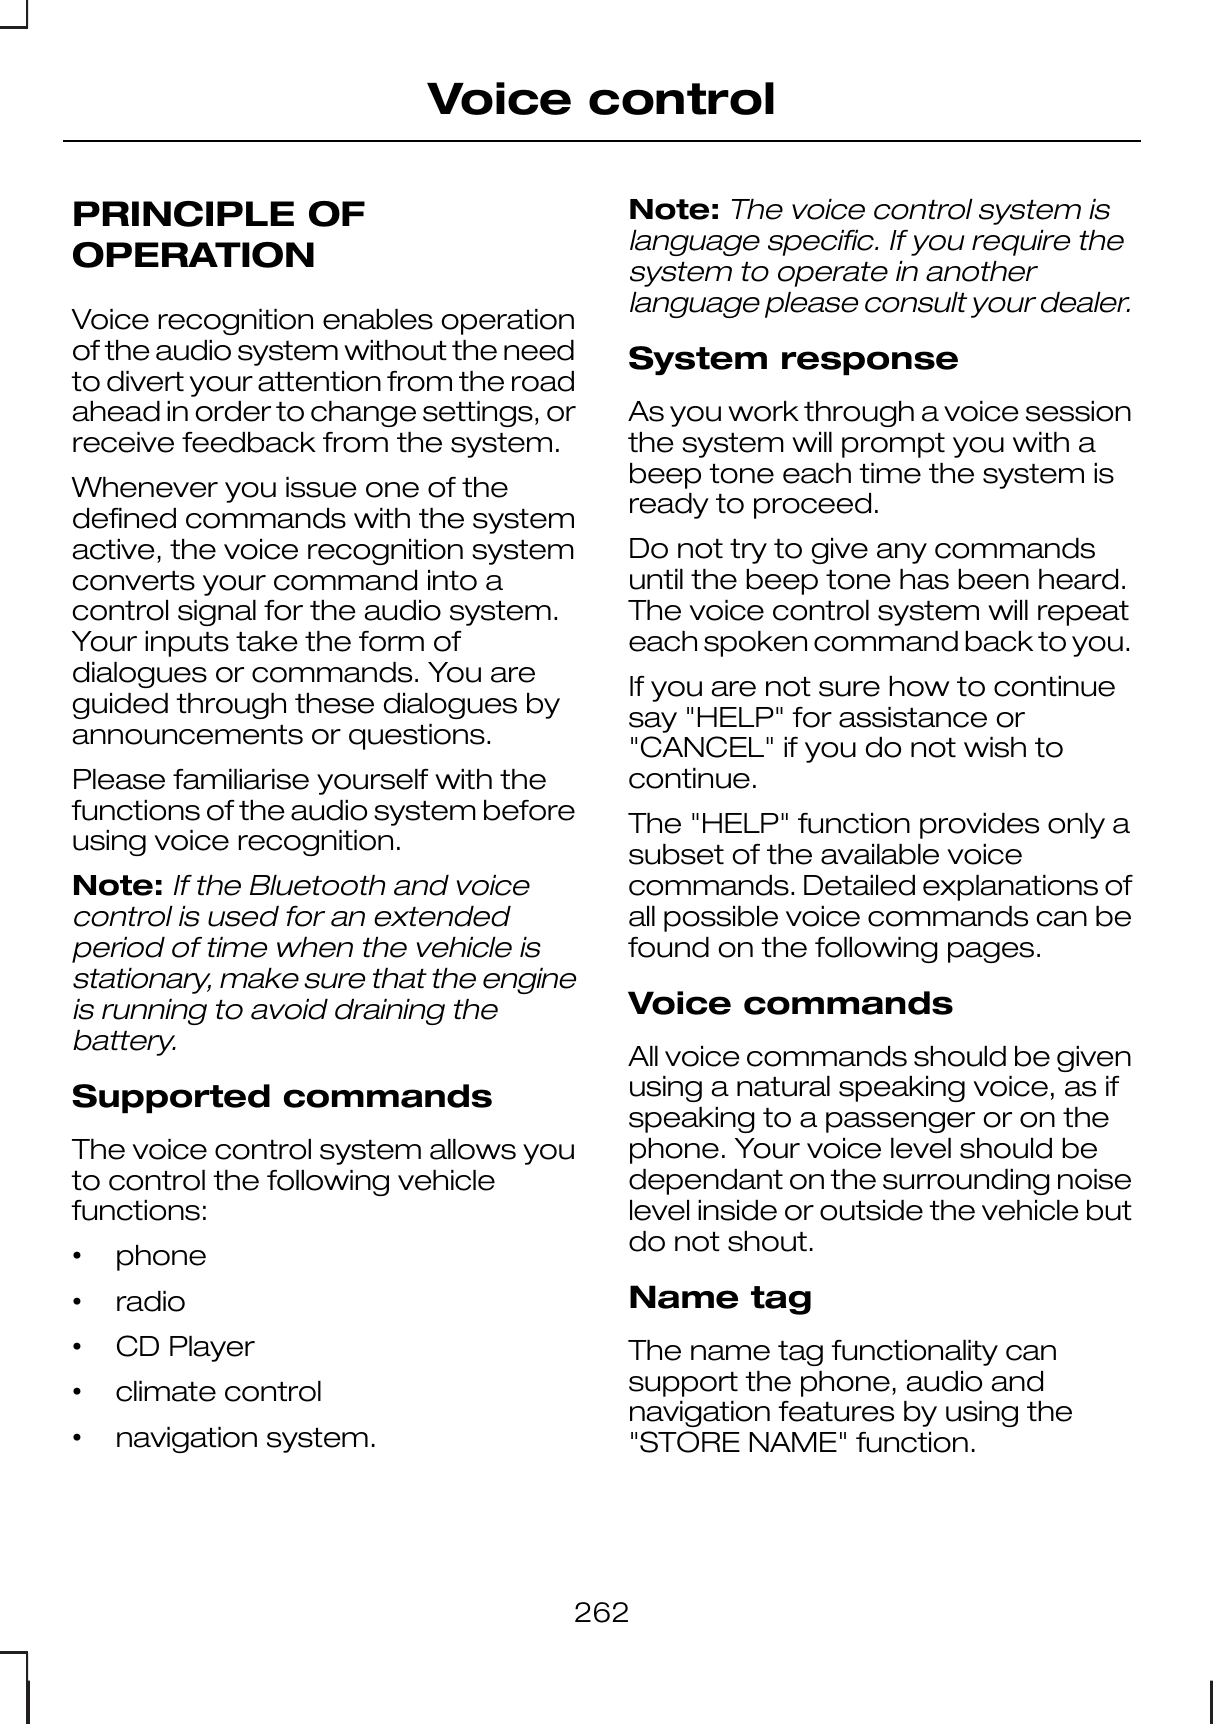 PRINCIPLE OFOPERATIONVoice recognition enables operationof the audio system without the needto divert your attention from the roadahead in order to change settings, orreceive feedback from the system.Whenever you issue one of thedefined commands with the systemactive, the voice recognition systemconverts your command into acontrol signal for the audio system.Your inputs take the form ofdialogues or commands. You areguided through these dialogues byannouncements or questions.Please familiarise yourself with thefunctions of the audio system beforeusing voice recognition.Note:If the Bluetooth and voicecontrol is used for an extendedperiod of time when the vehicle isstationary, make sure that the engineis running to avoid draining thebattery.Supported commandsThe voice control system allows youto control the following vehiclefunctions:•phone•radio•CD Player•climate control•navigation system.Note:The voice control system islanguage specific. If you require thesystem to operate in anotherlanguage please consult your dealer.System responseAs you work through a voice sessionthe system will prompt you with abeep tone each time the system isready to proceed.Do not try to give any commandsuntil the beep tone has been heard.The voice control system will repeateach spoken command back to you.If you are not sure how to continuesay &quot;HELP&quot; for assistance or&quot;CANCEL&quot; if you do not wish tocontinue.The &quot;HELP&quot; function provides only asubset of the available voicecommands. Detailed explanations ofall possible voice commands can befound on the following pages.Voice commandsAll voice commands should be givenusing a natural speaking voice, as ifspeaking to a passenger or on thephone. Your voice level should bedependant on the surrounding noiselevel inside or outside the vehicle butdo not shout.Name tagThe name tag functionality cansupport the phone, audio andnavigation features by using the&quot;STORE NAME&quot; function.262Voice control